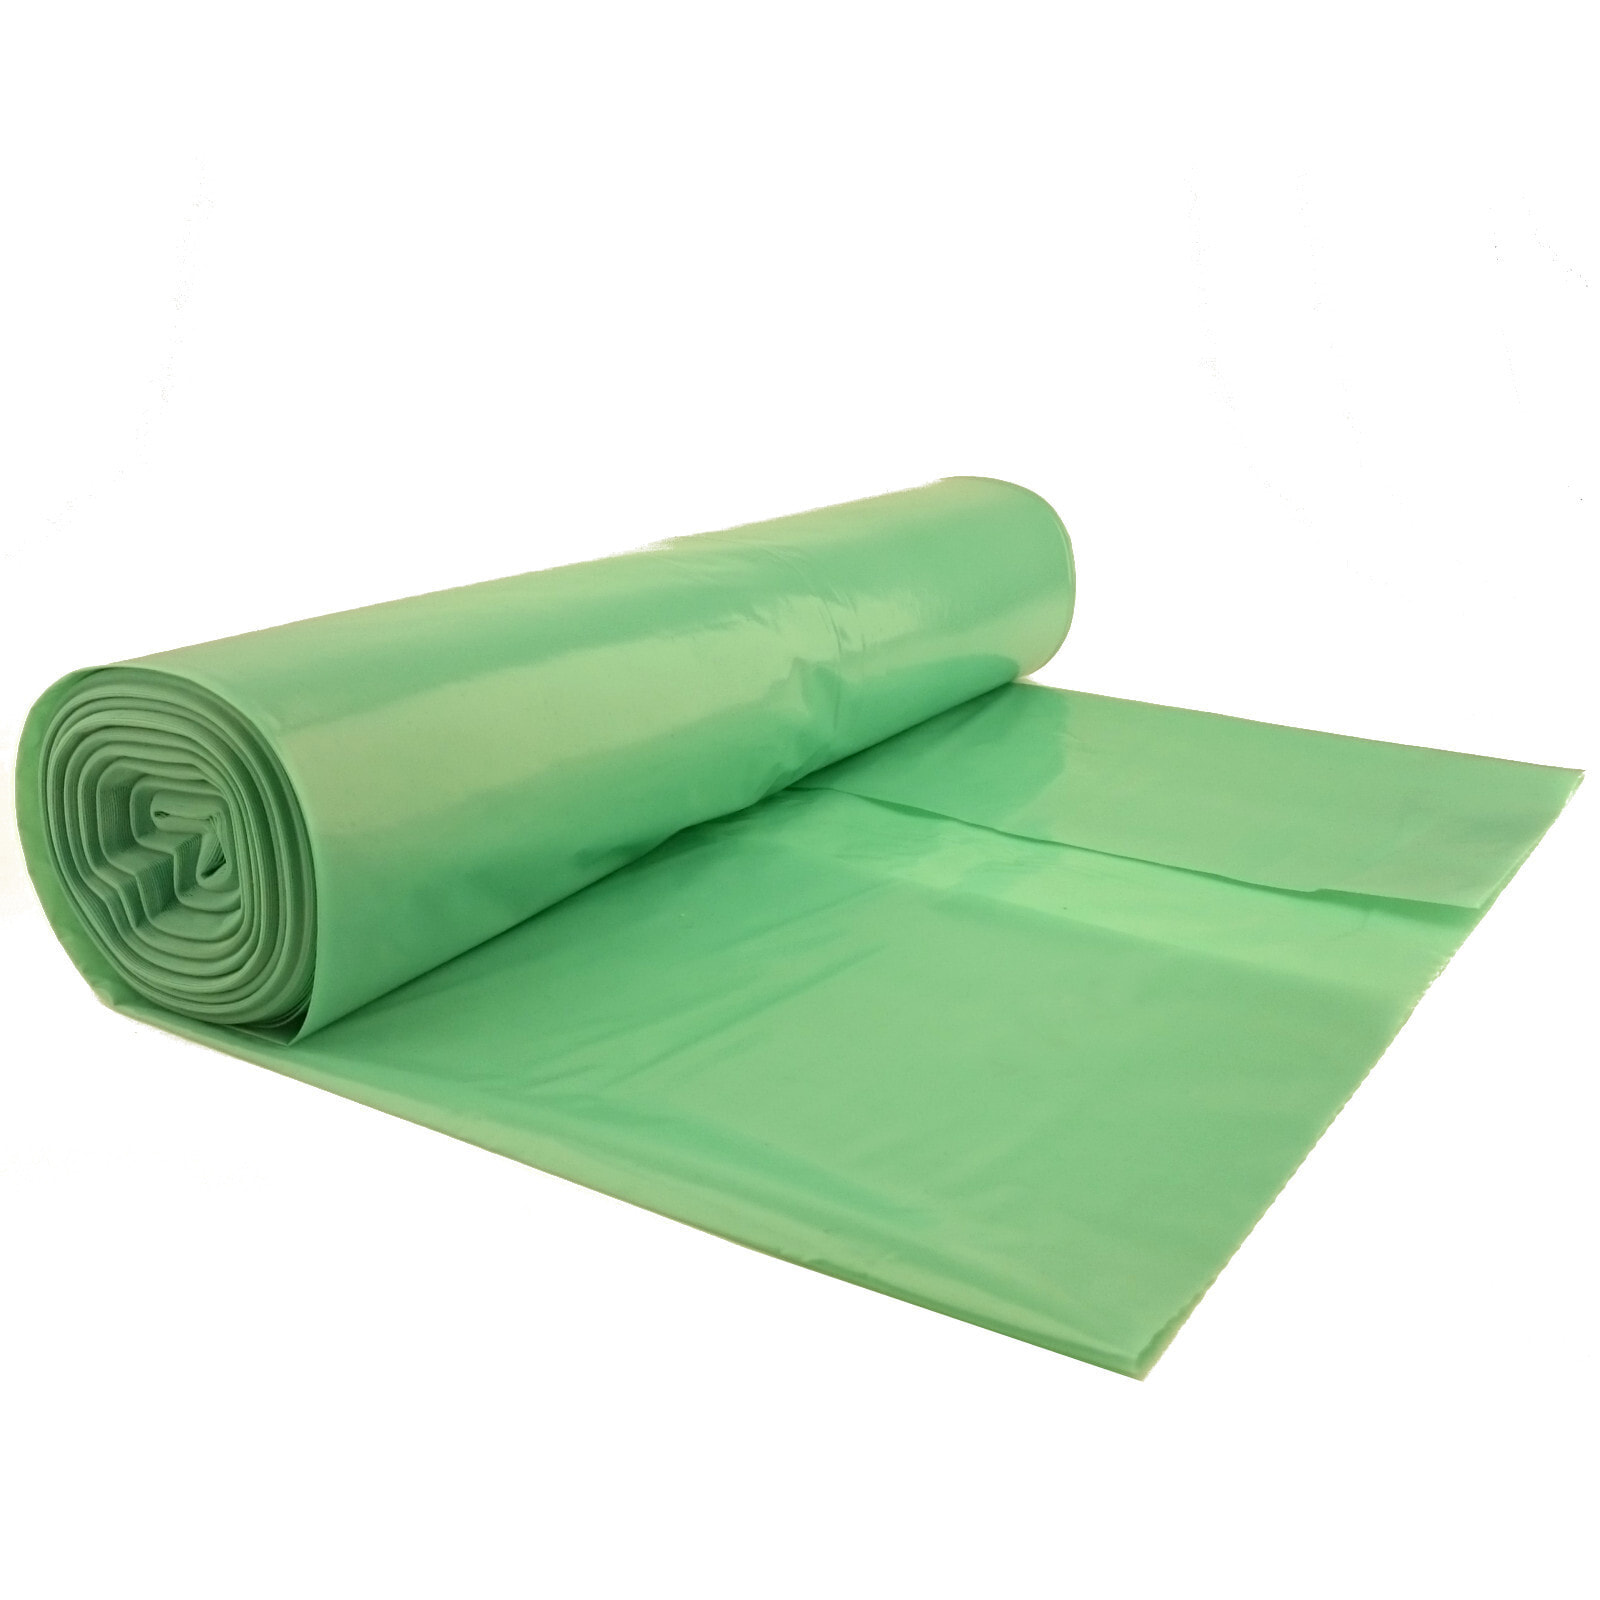 80 micron thick garbage bags. durable roll 5 pcs. - green 240L